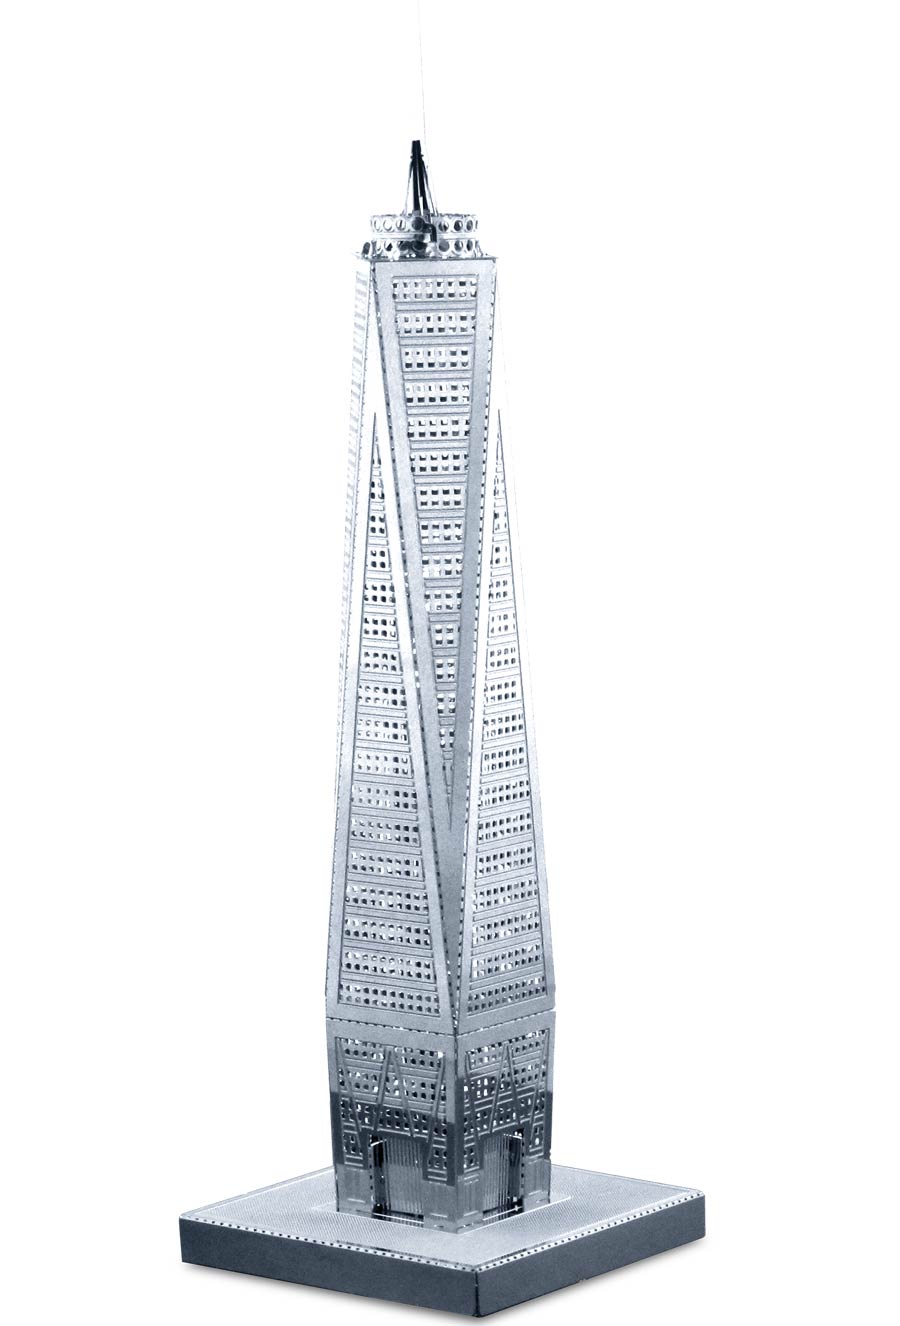 NYC Metal Earth Model Kit - One World Trade Center